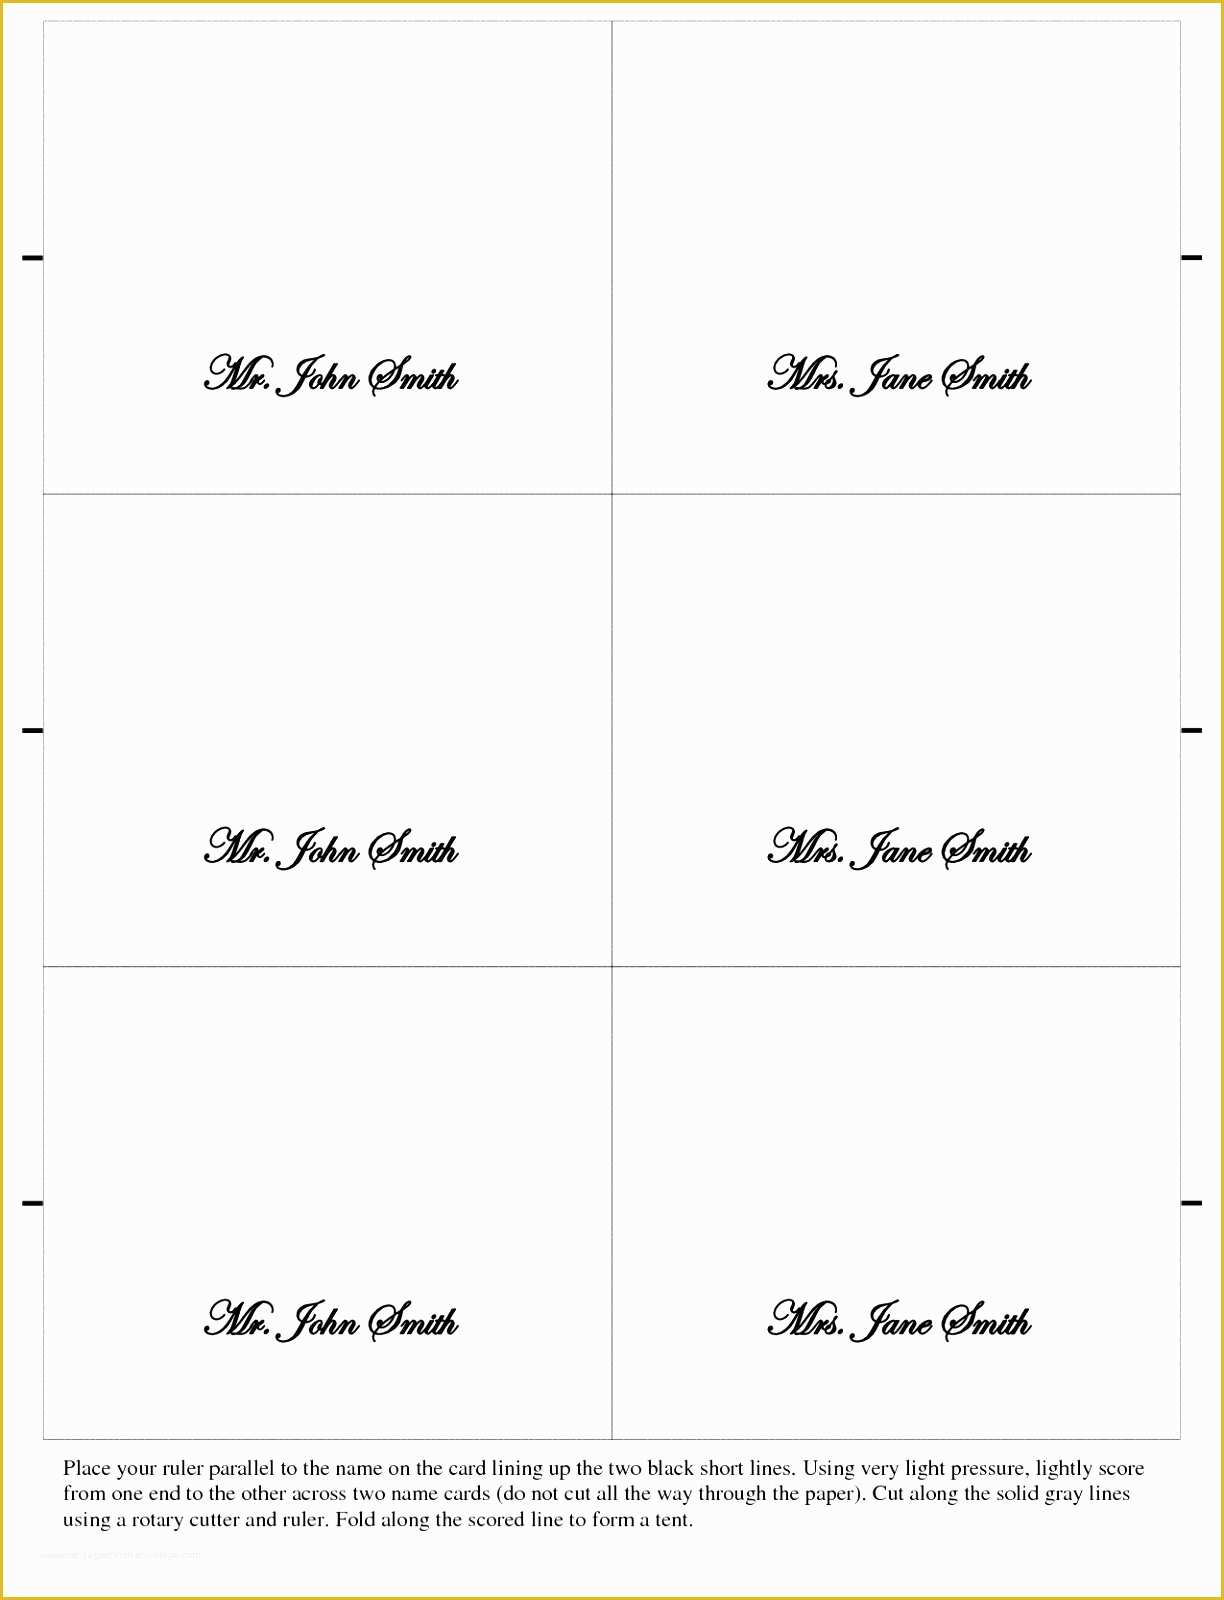 Wedding Video Templates Free Download Of 10 Wedding Place Card Templates Free Download Ueewo